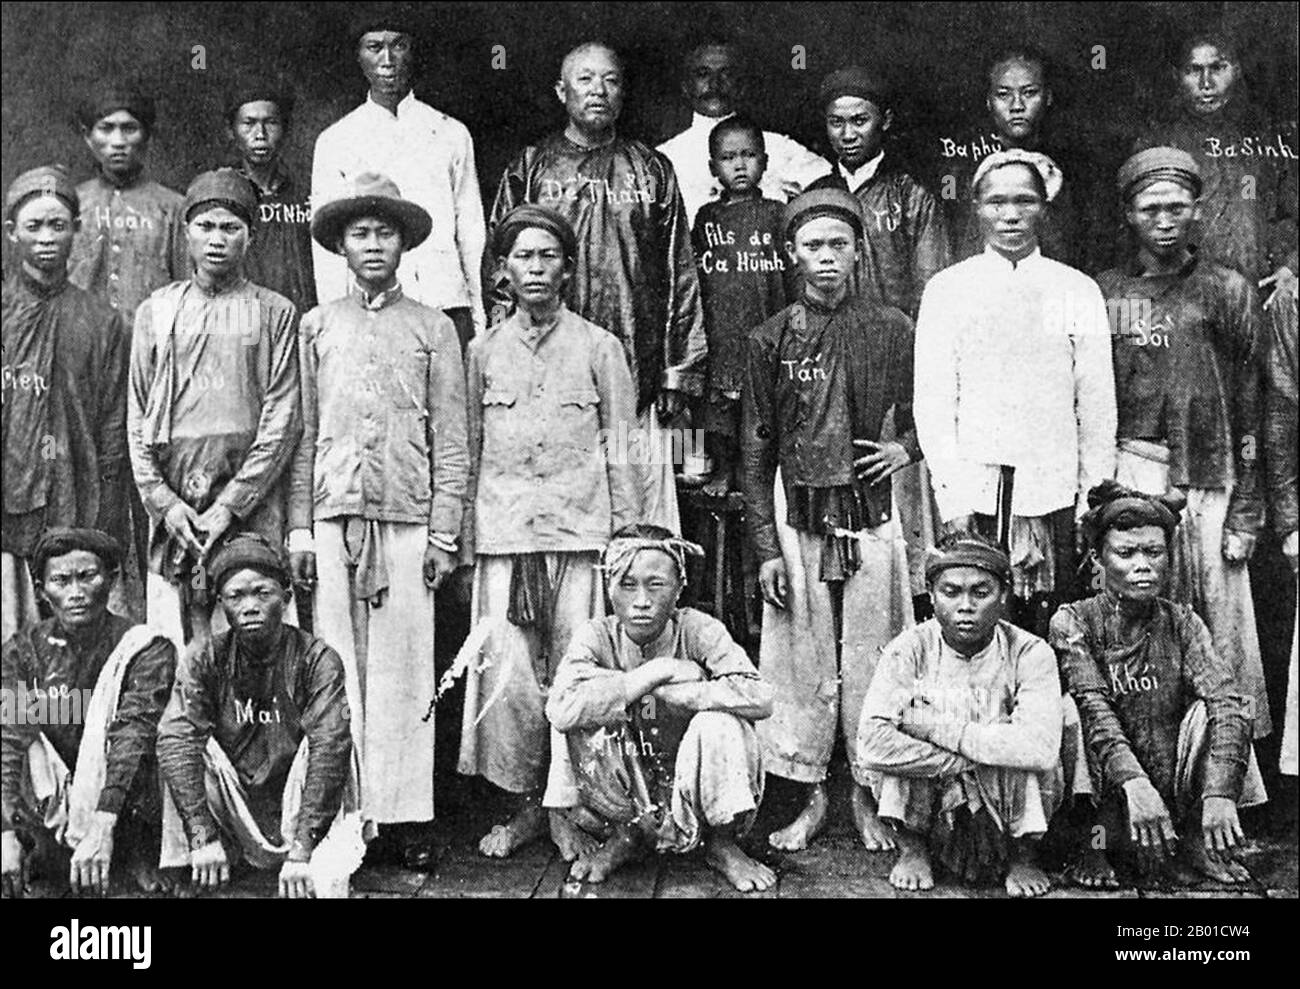 Vietnam: De Tham (1858-1913), Vietnamese patriot and anti-colonialist, together with members of his guerrilla band, duly labelled where possible by agents of the French security, c. 1900.  Đề Thám, born Đoàn Văn Nghĩa and also called Hoàng Hoa Thám or Commander Thám, was a Vietnamese resistance fighter and enemy of French colonialism during the first two decades of French rule in Indochina. A Feudal lord from Yên Thế, he led the Yên Thế Insurrection that fought off the French protectorate in Tonkin for thirty years. He was eventually assassinated by a French agent. Stock Photo